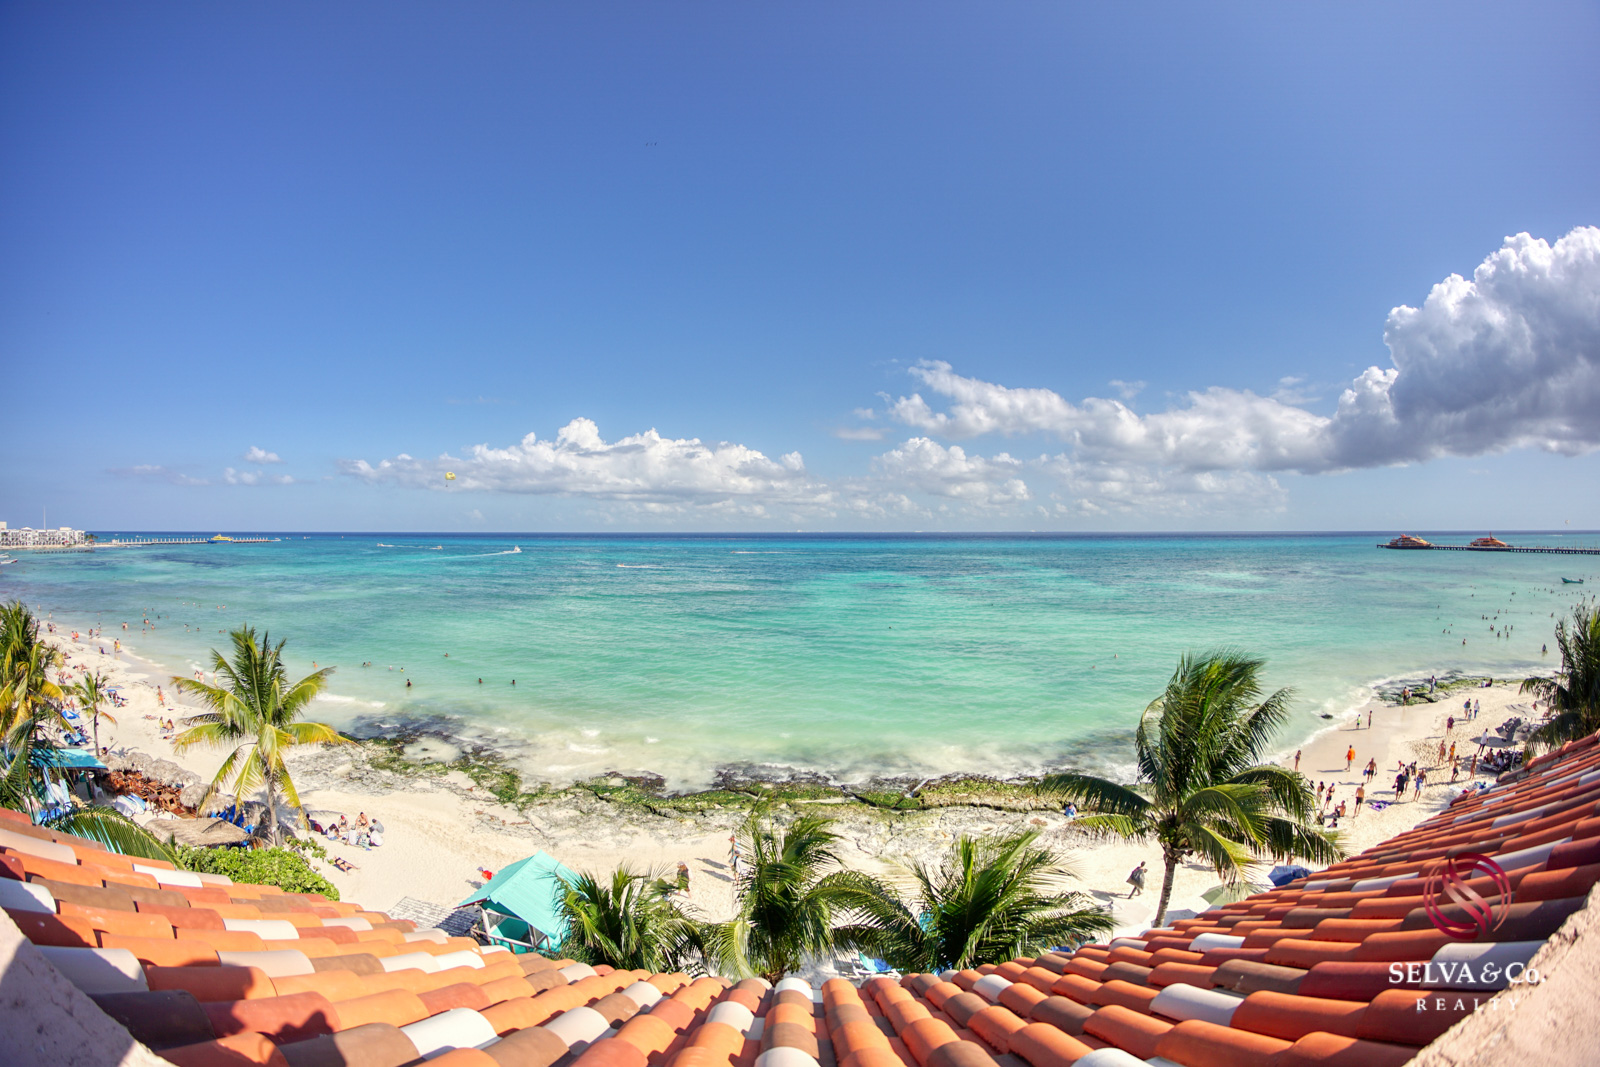 Property with 2 apartments steps from the beach in Playacar phase 1 for sale.